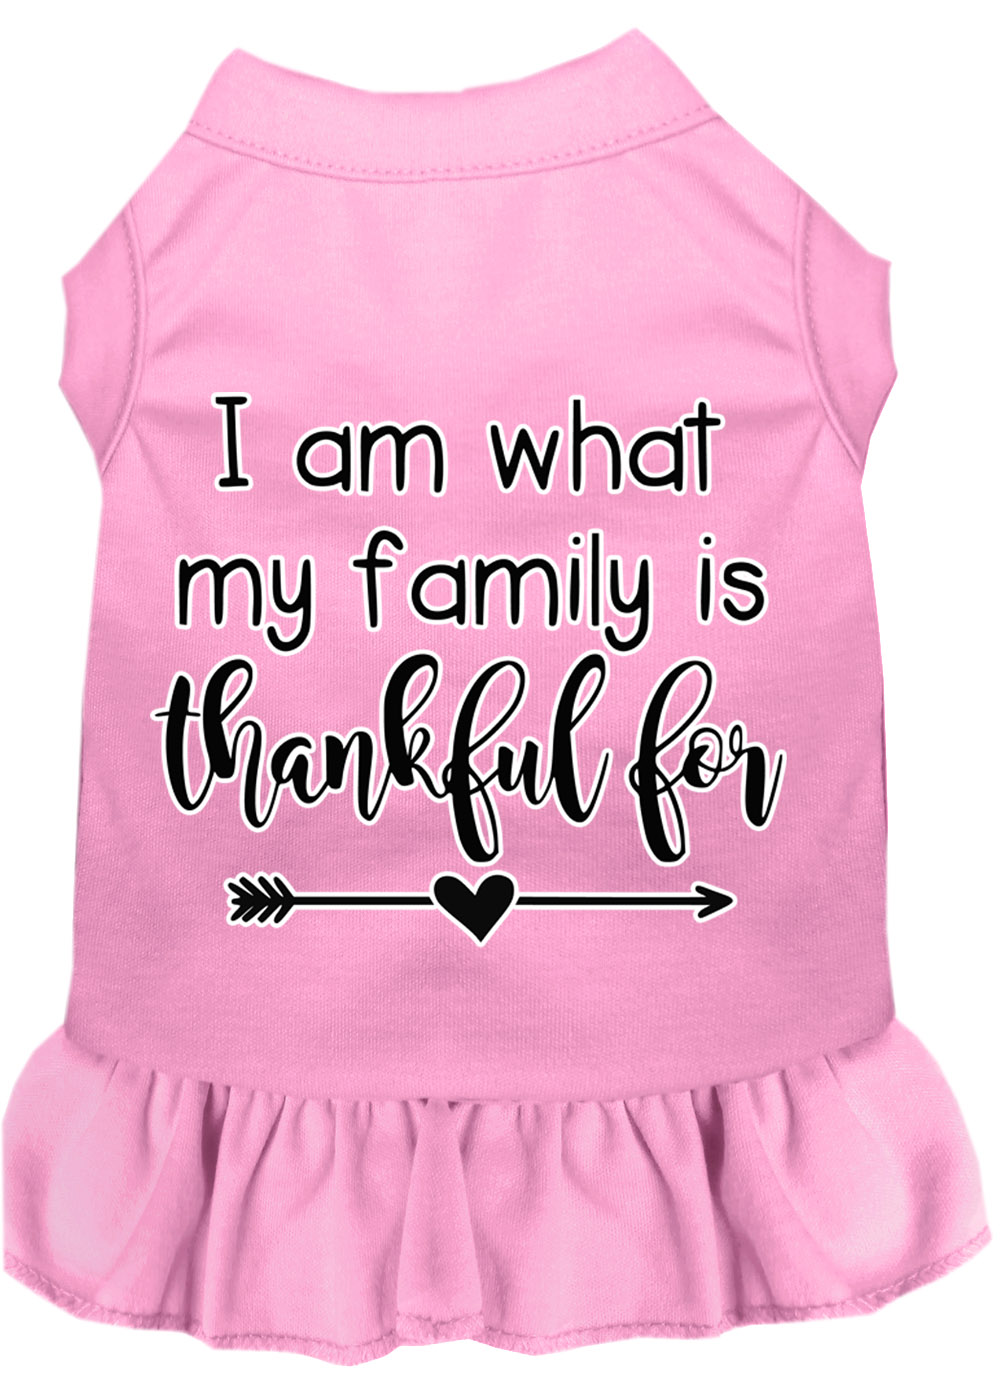 I Am What My Family is Thankful For Screen Print Dog Dress Light Pink Sm